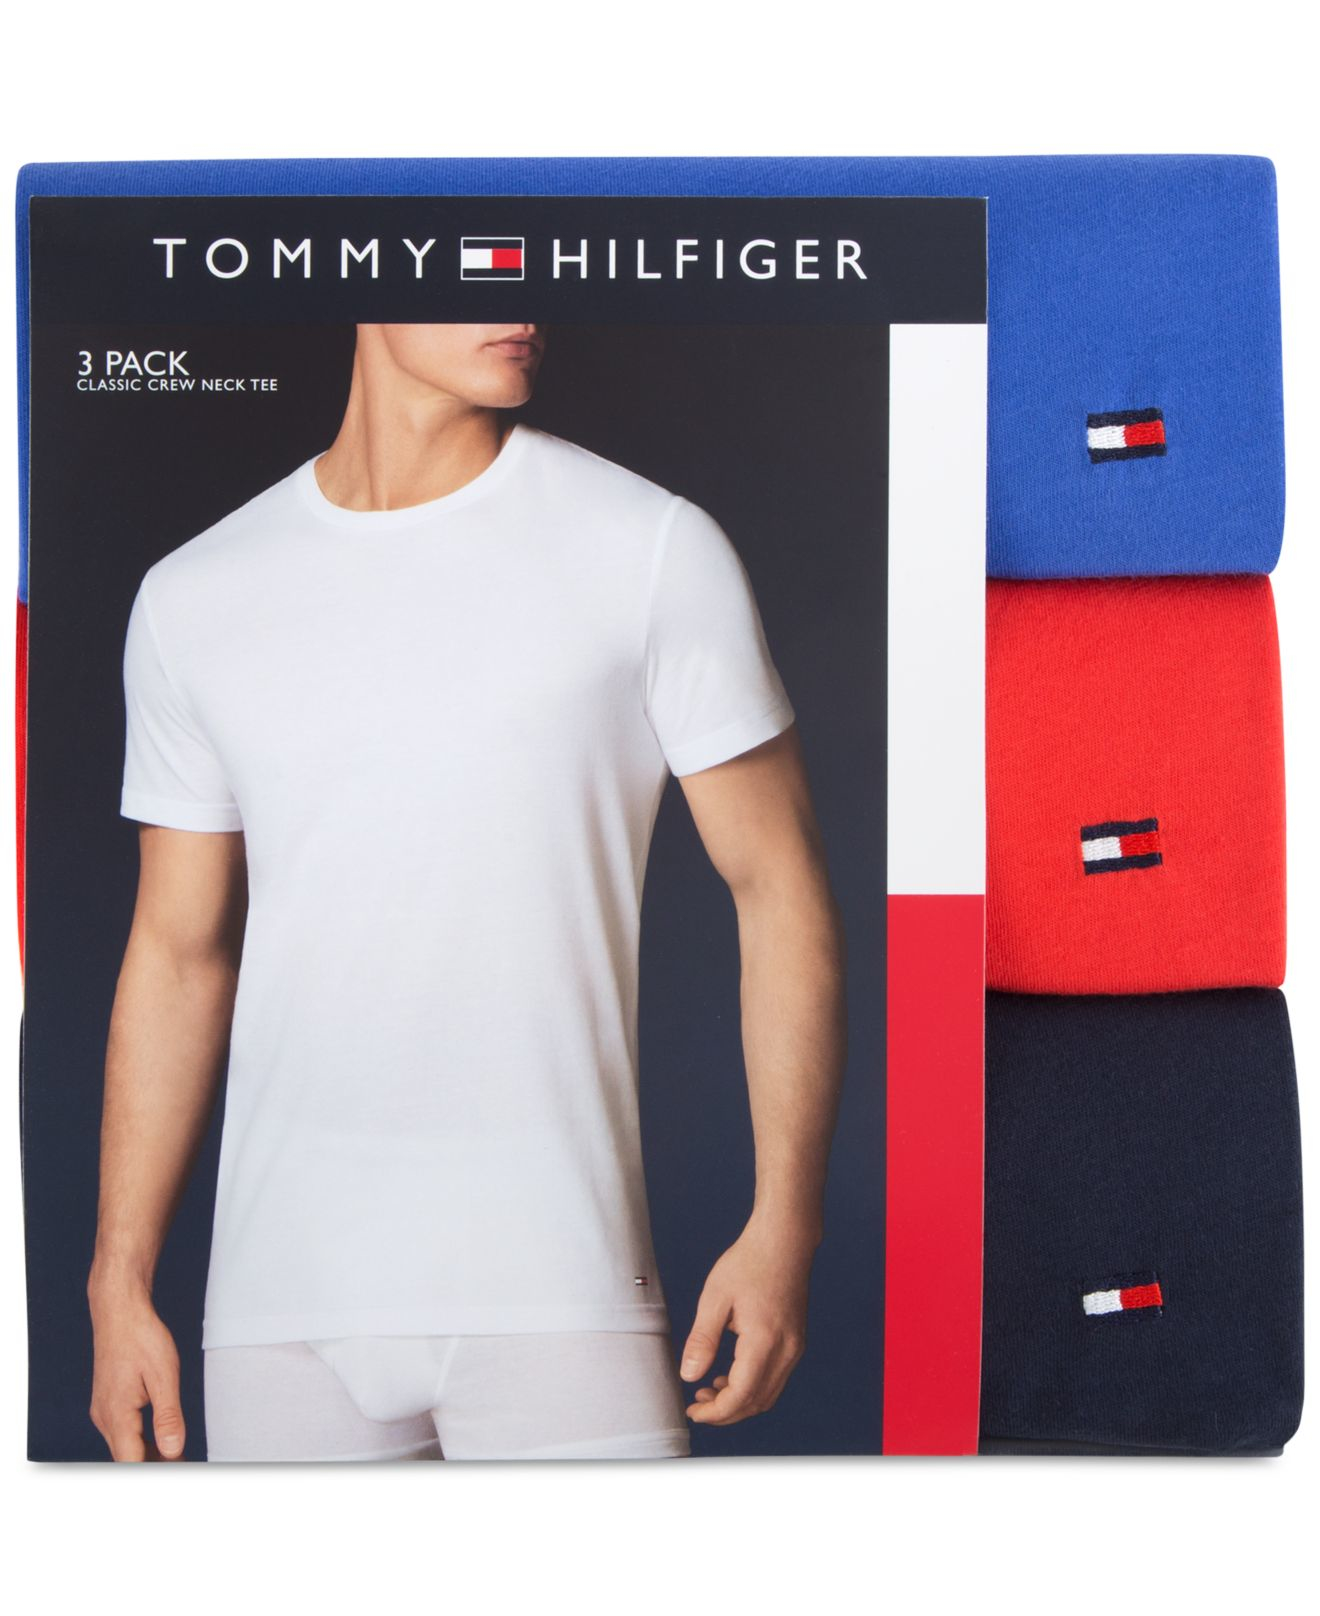 Buy > tommy hilfiger pack t shirts > in stock